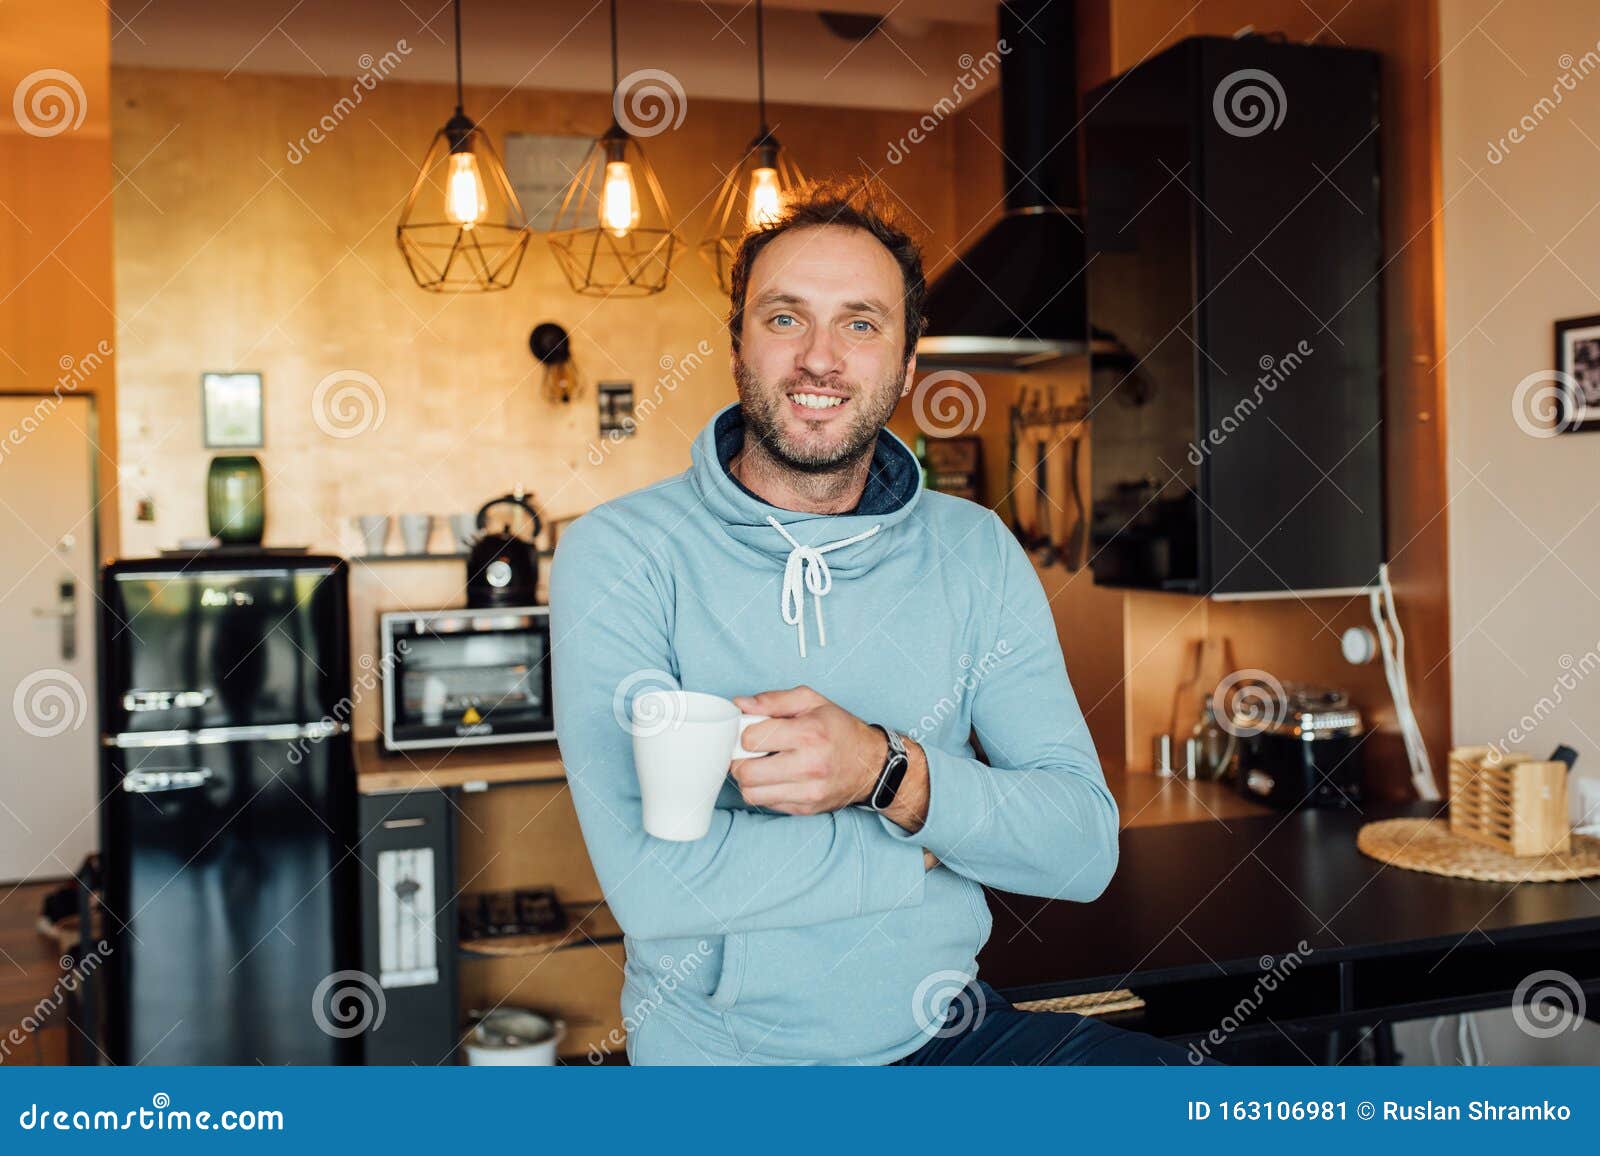 Morning News. Handsome Young Man Drinking Coffee at Home in the Loft ...